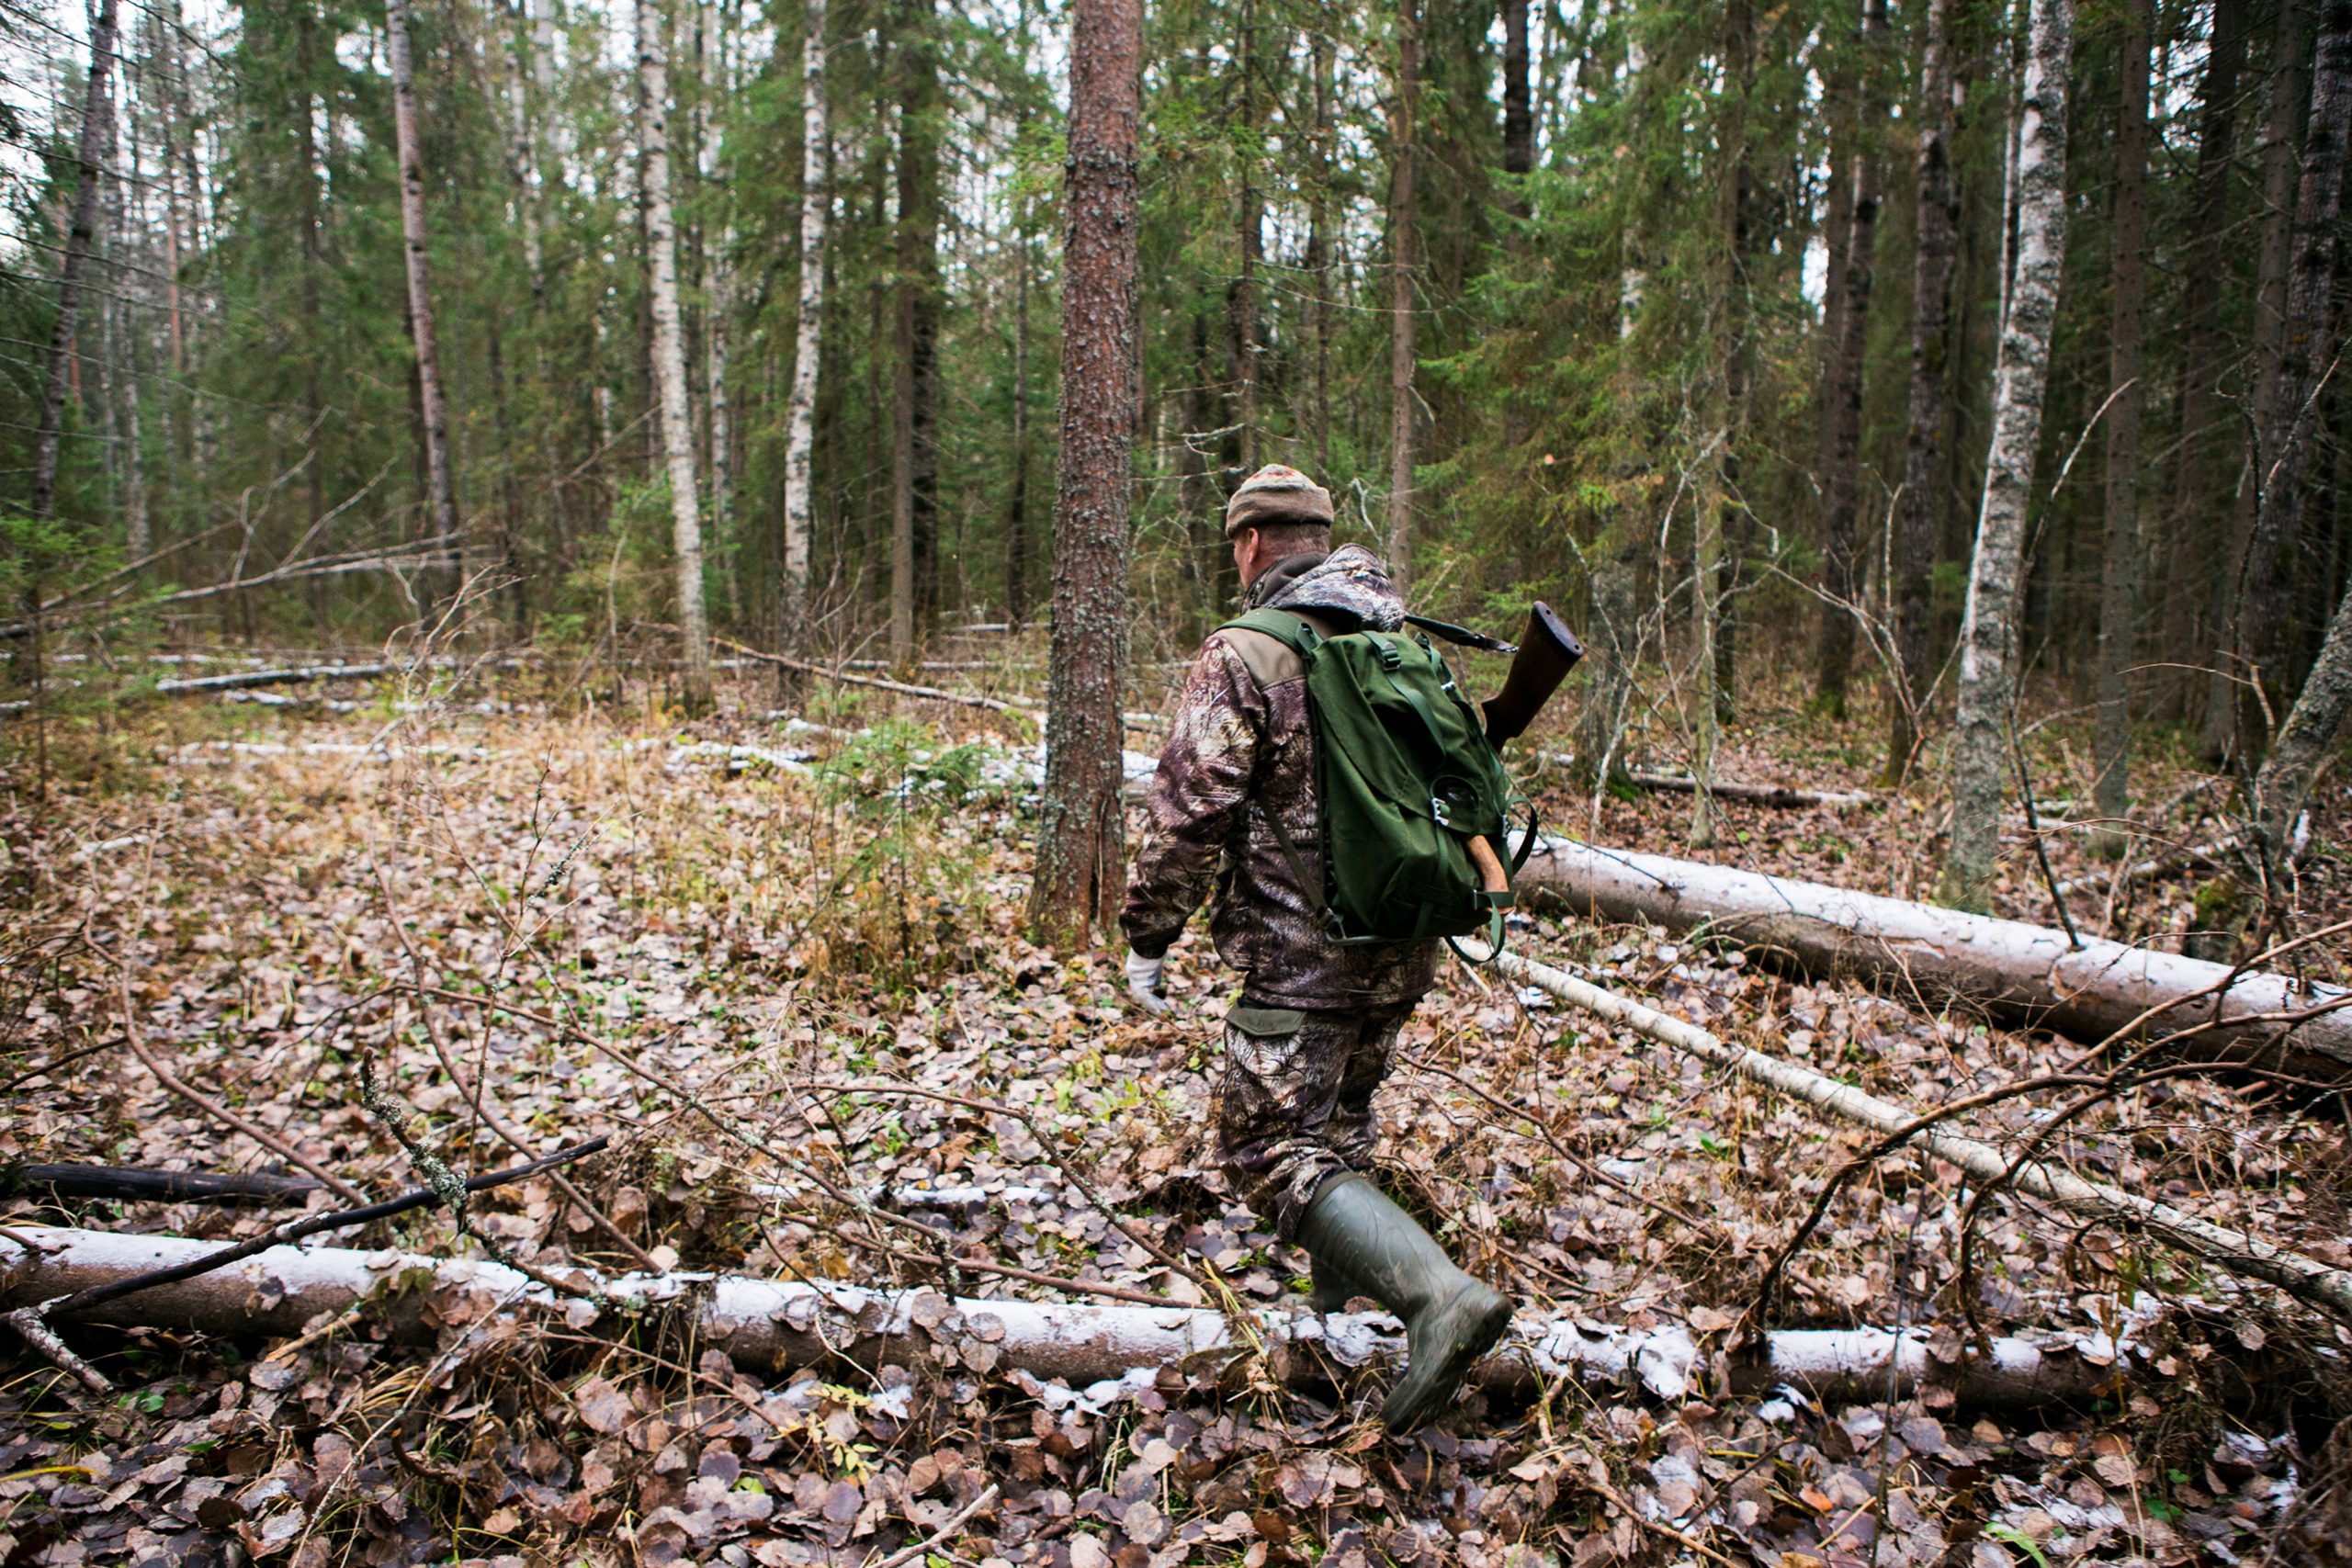 best boots for cold weather tree stand hunting